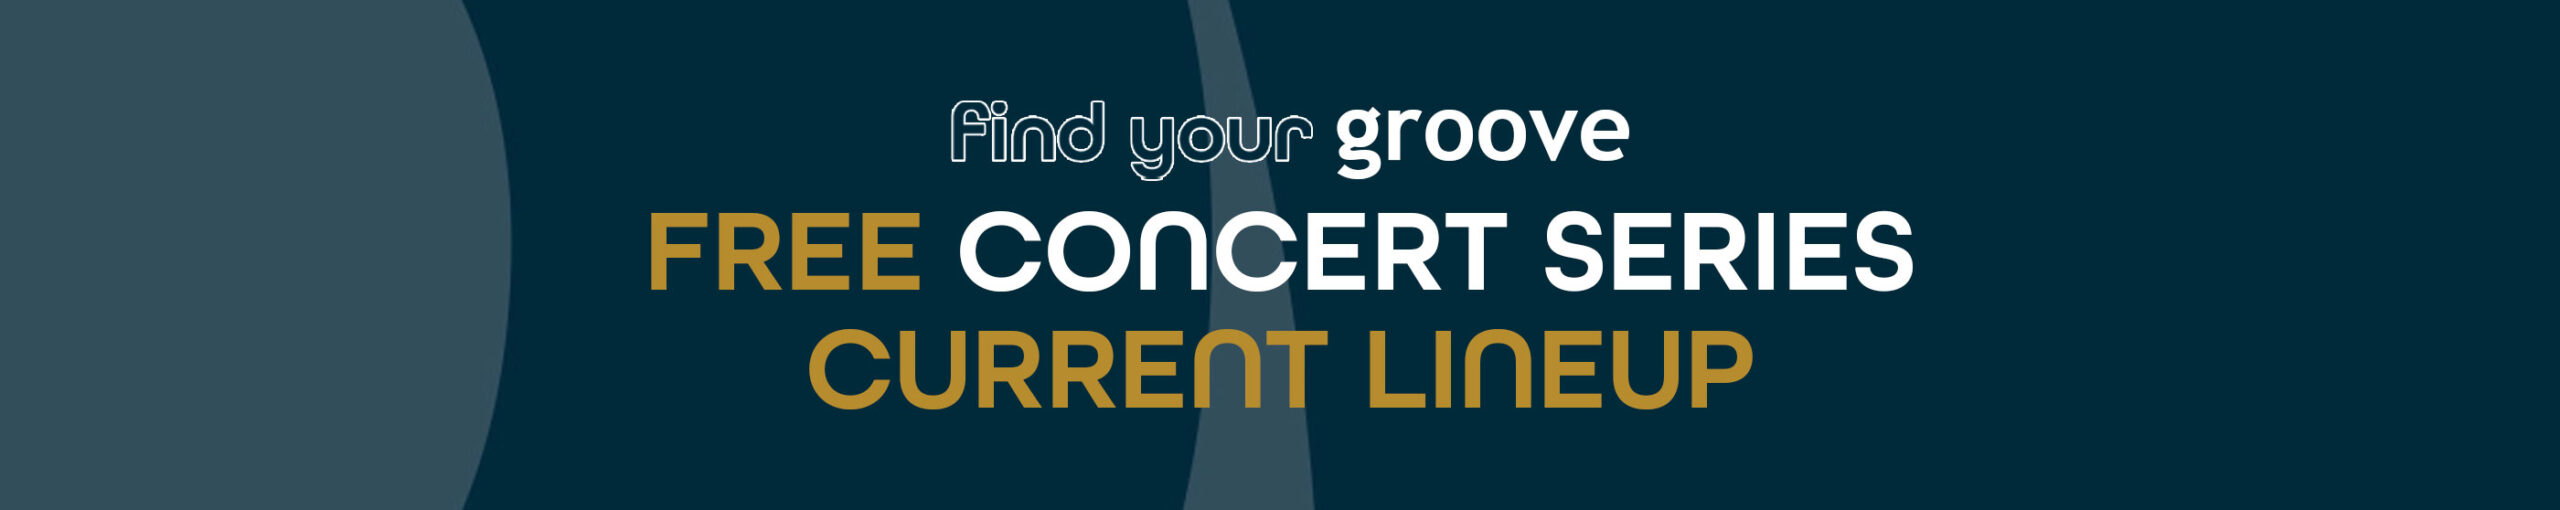 find your groove free concert series